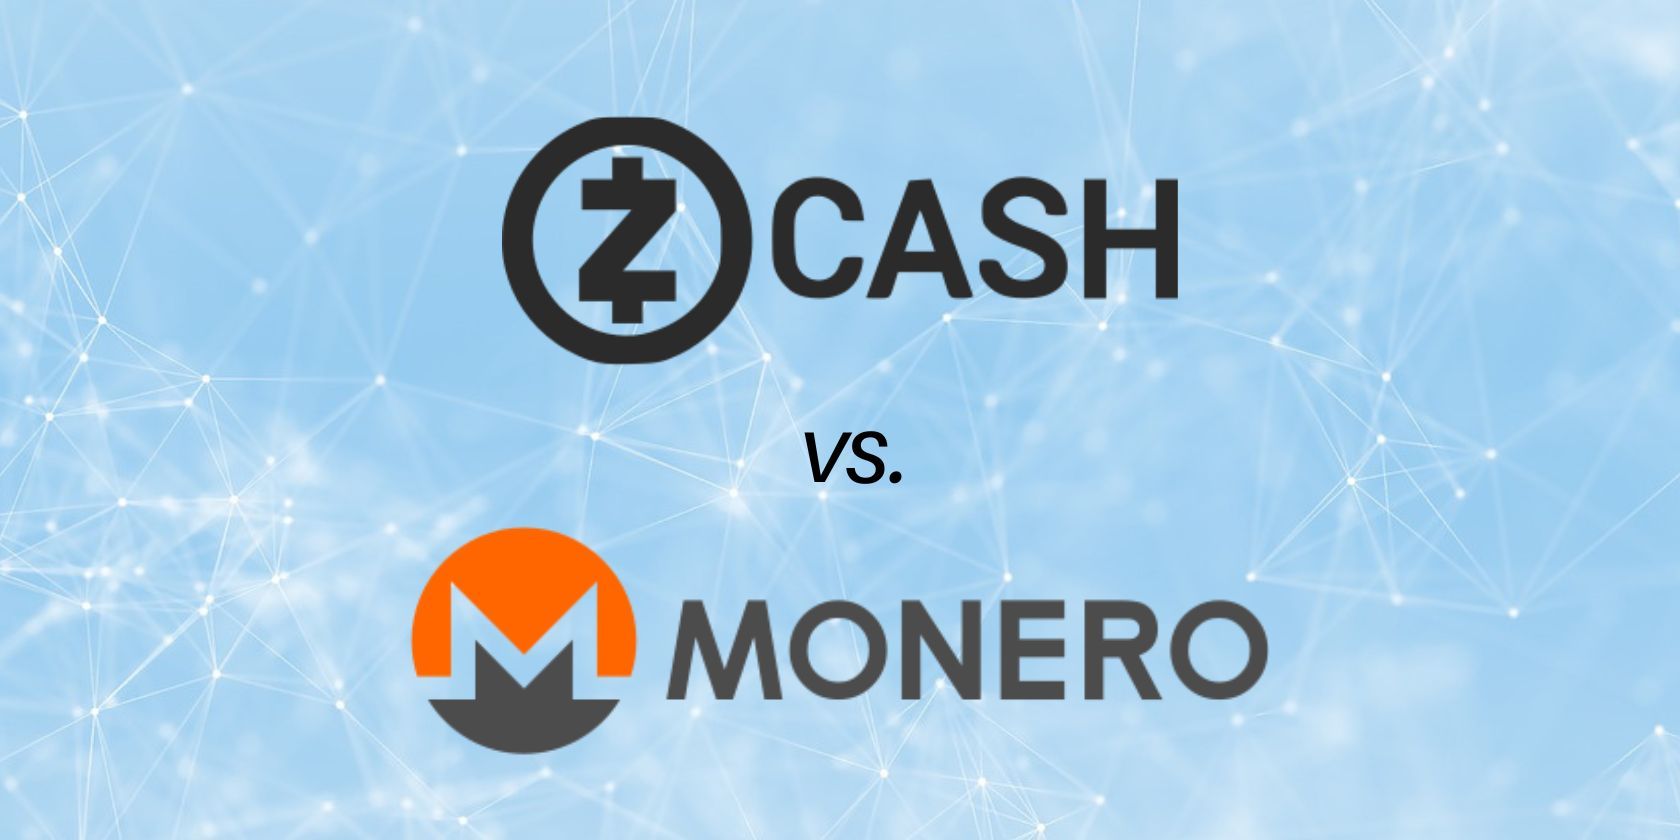 zcash and monero logos on pale blue background